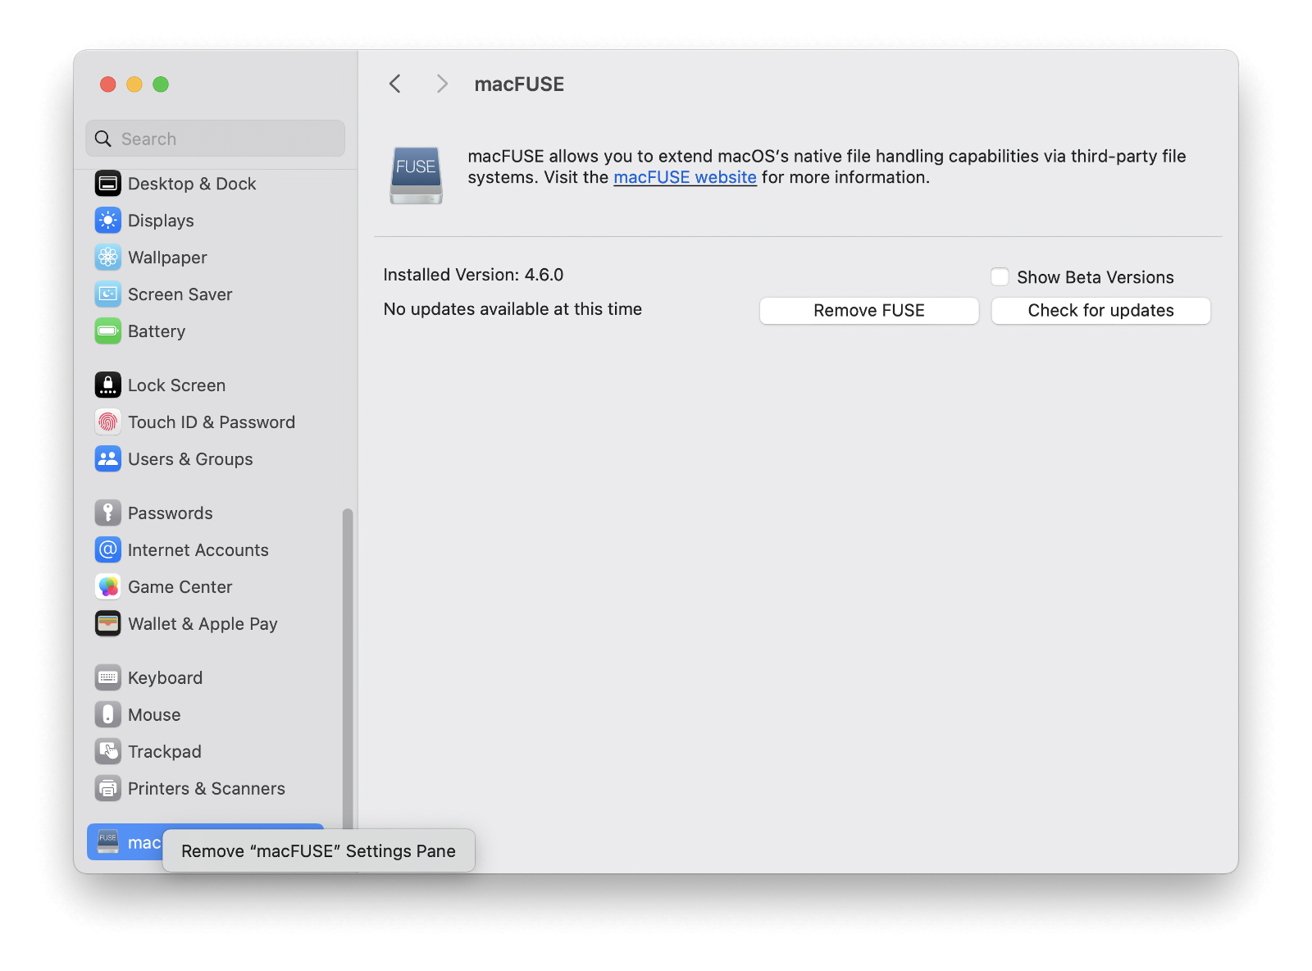 Screenshot of a macOS settings pane showing macFUSE software with version number and update options.